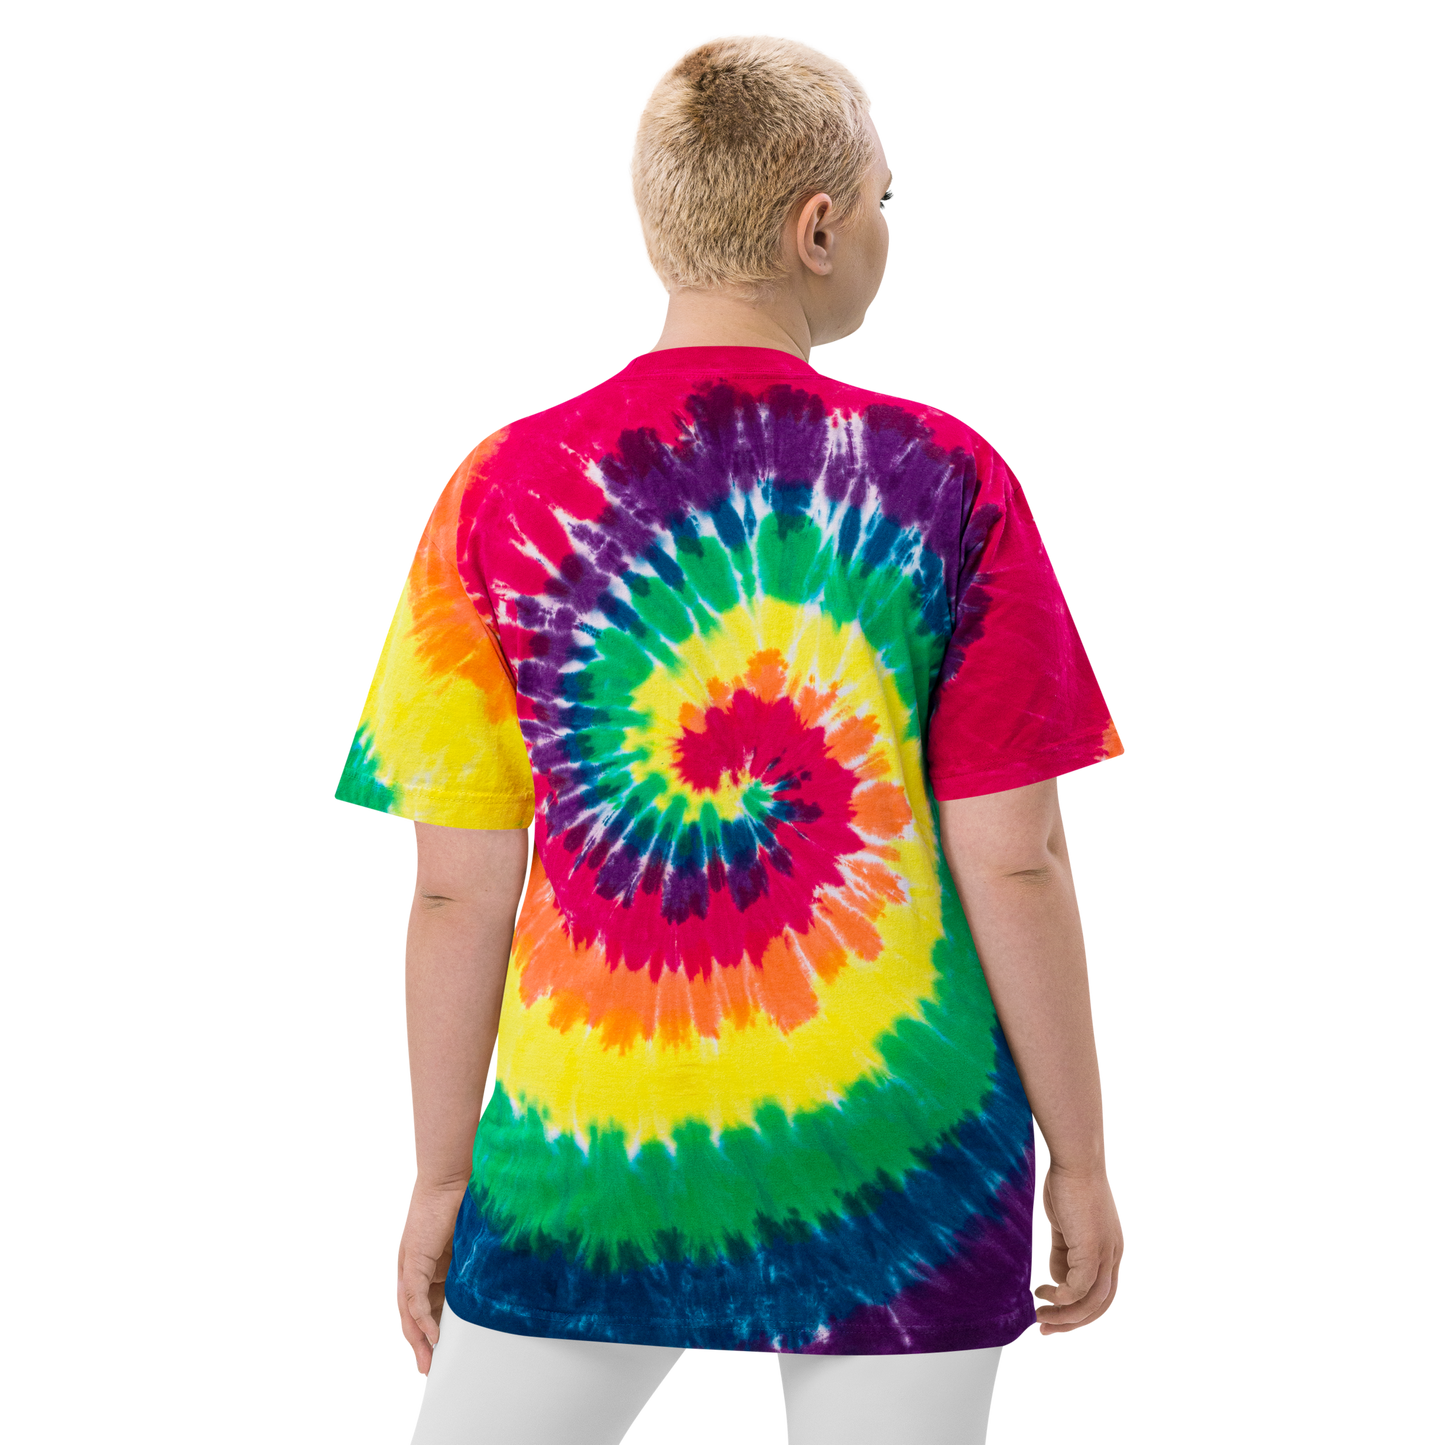 Crossed-X Oversized Tie-Dye T-Shirt • YVR Vancouver • YHM Designs - Image 14